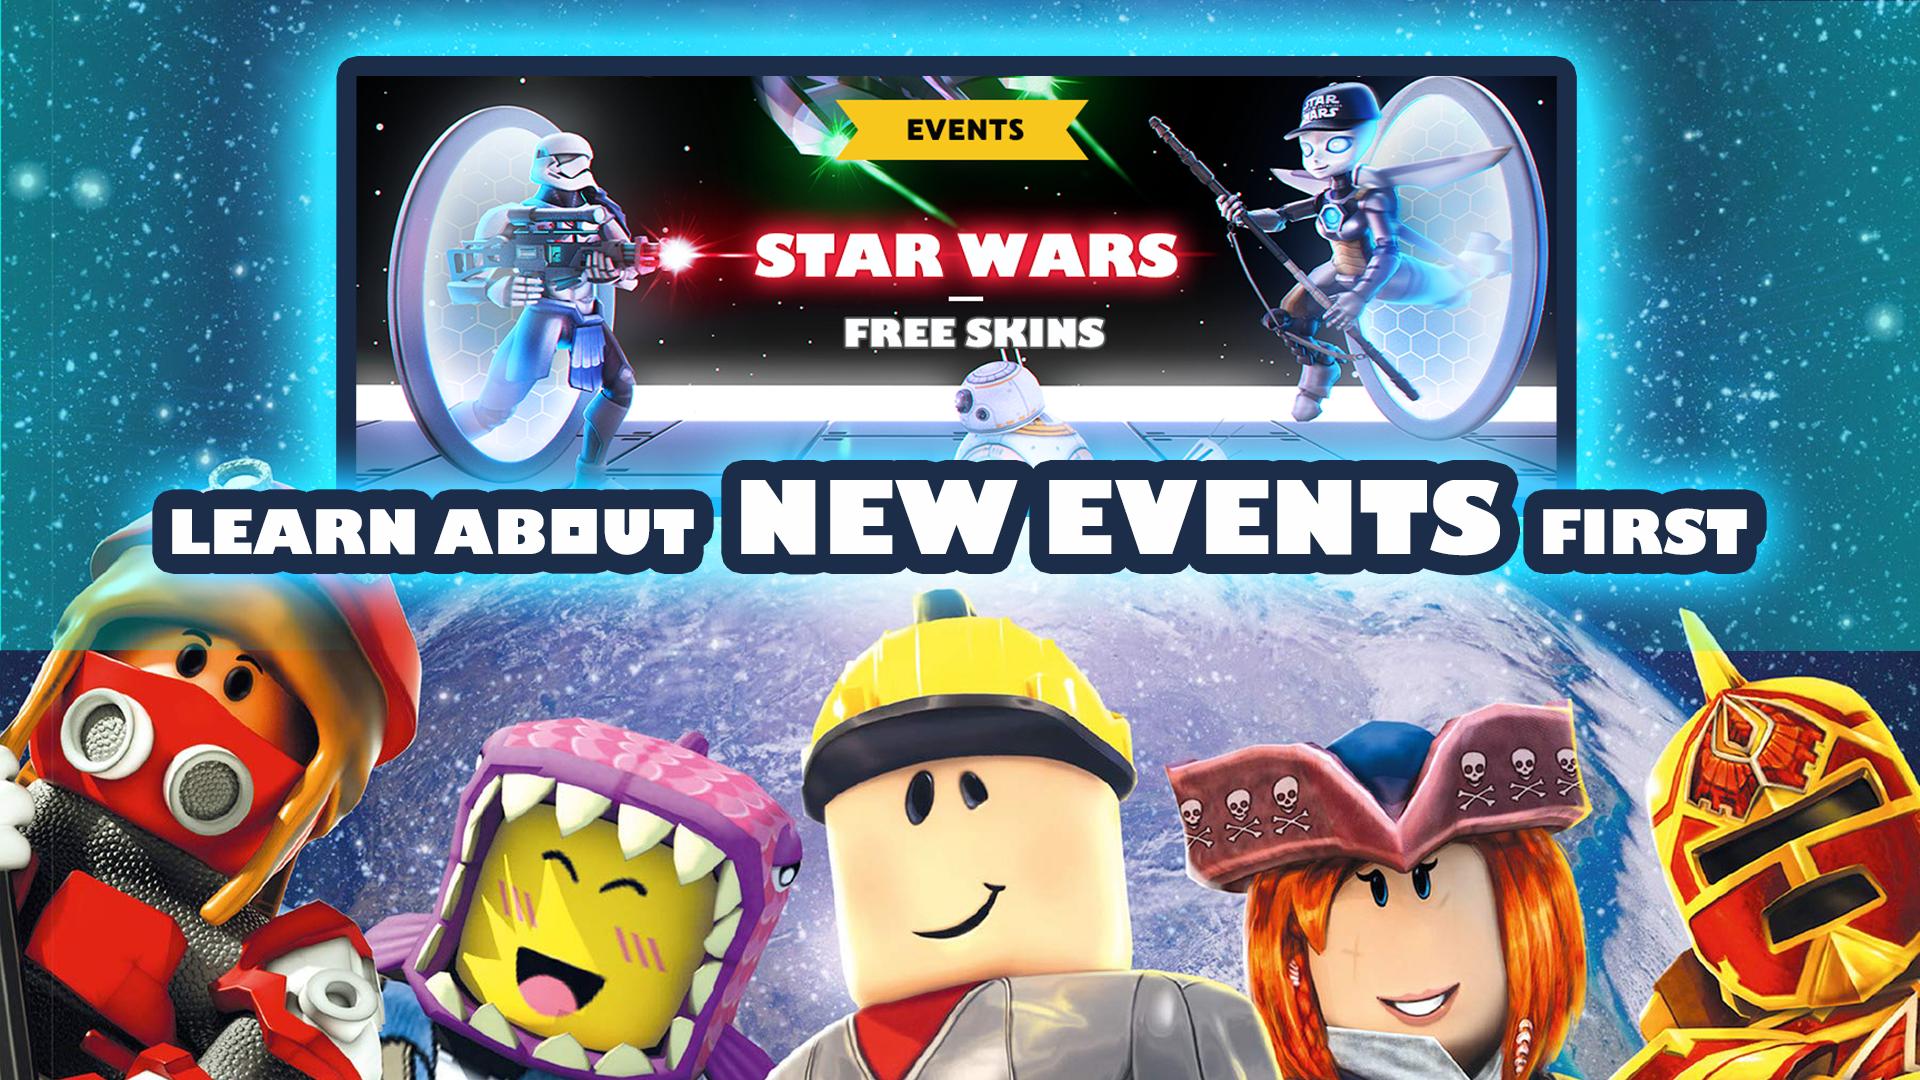 Master Skins For Roblox For Android Apk Download